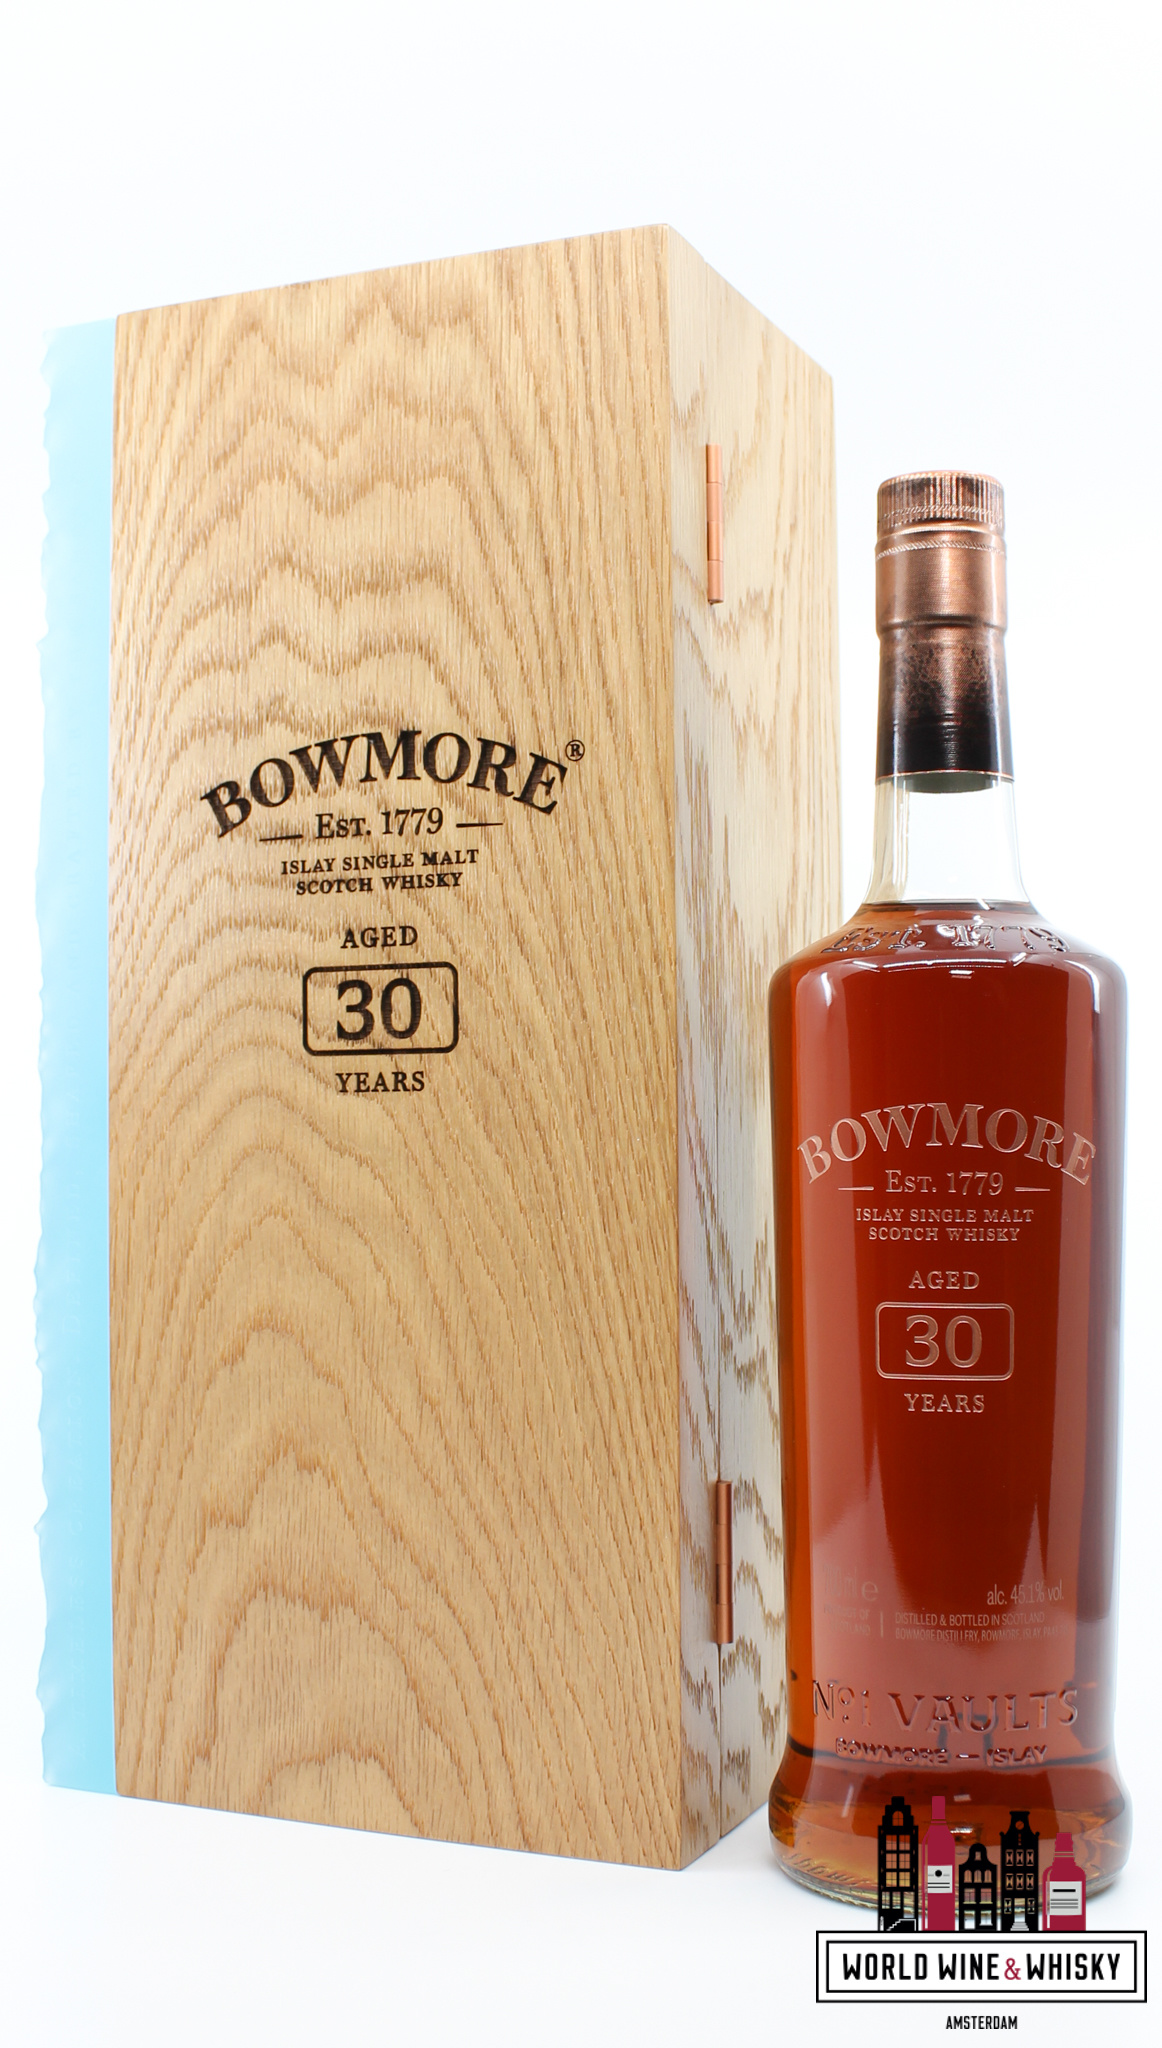 Bowmore Bowmore 30 Years Old - Edition 2021 (Bottled in 2020) 45.1% (1 of 2976) - Full Set